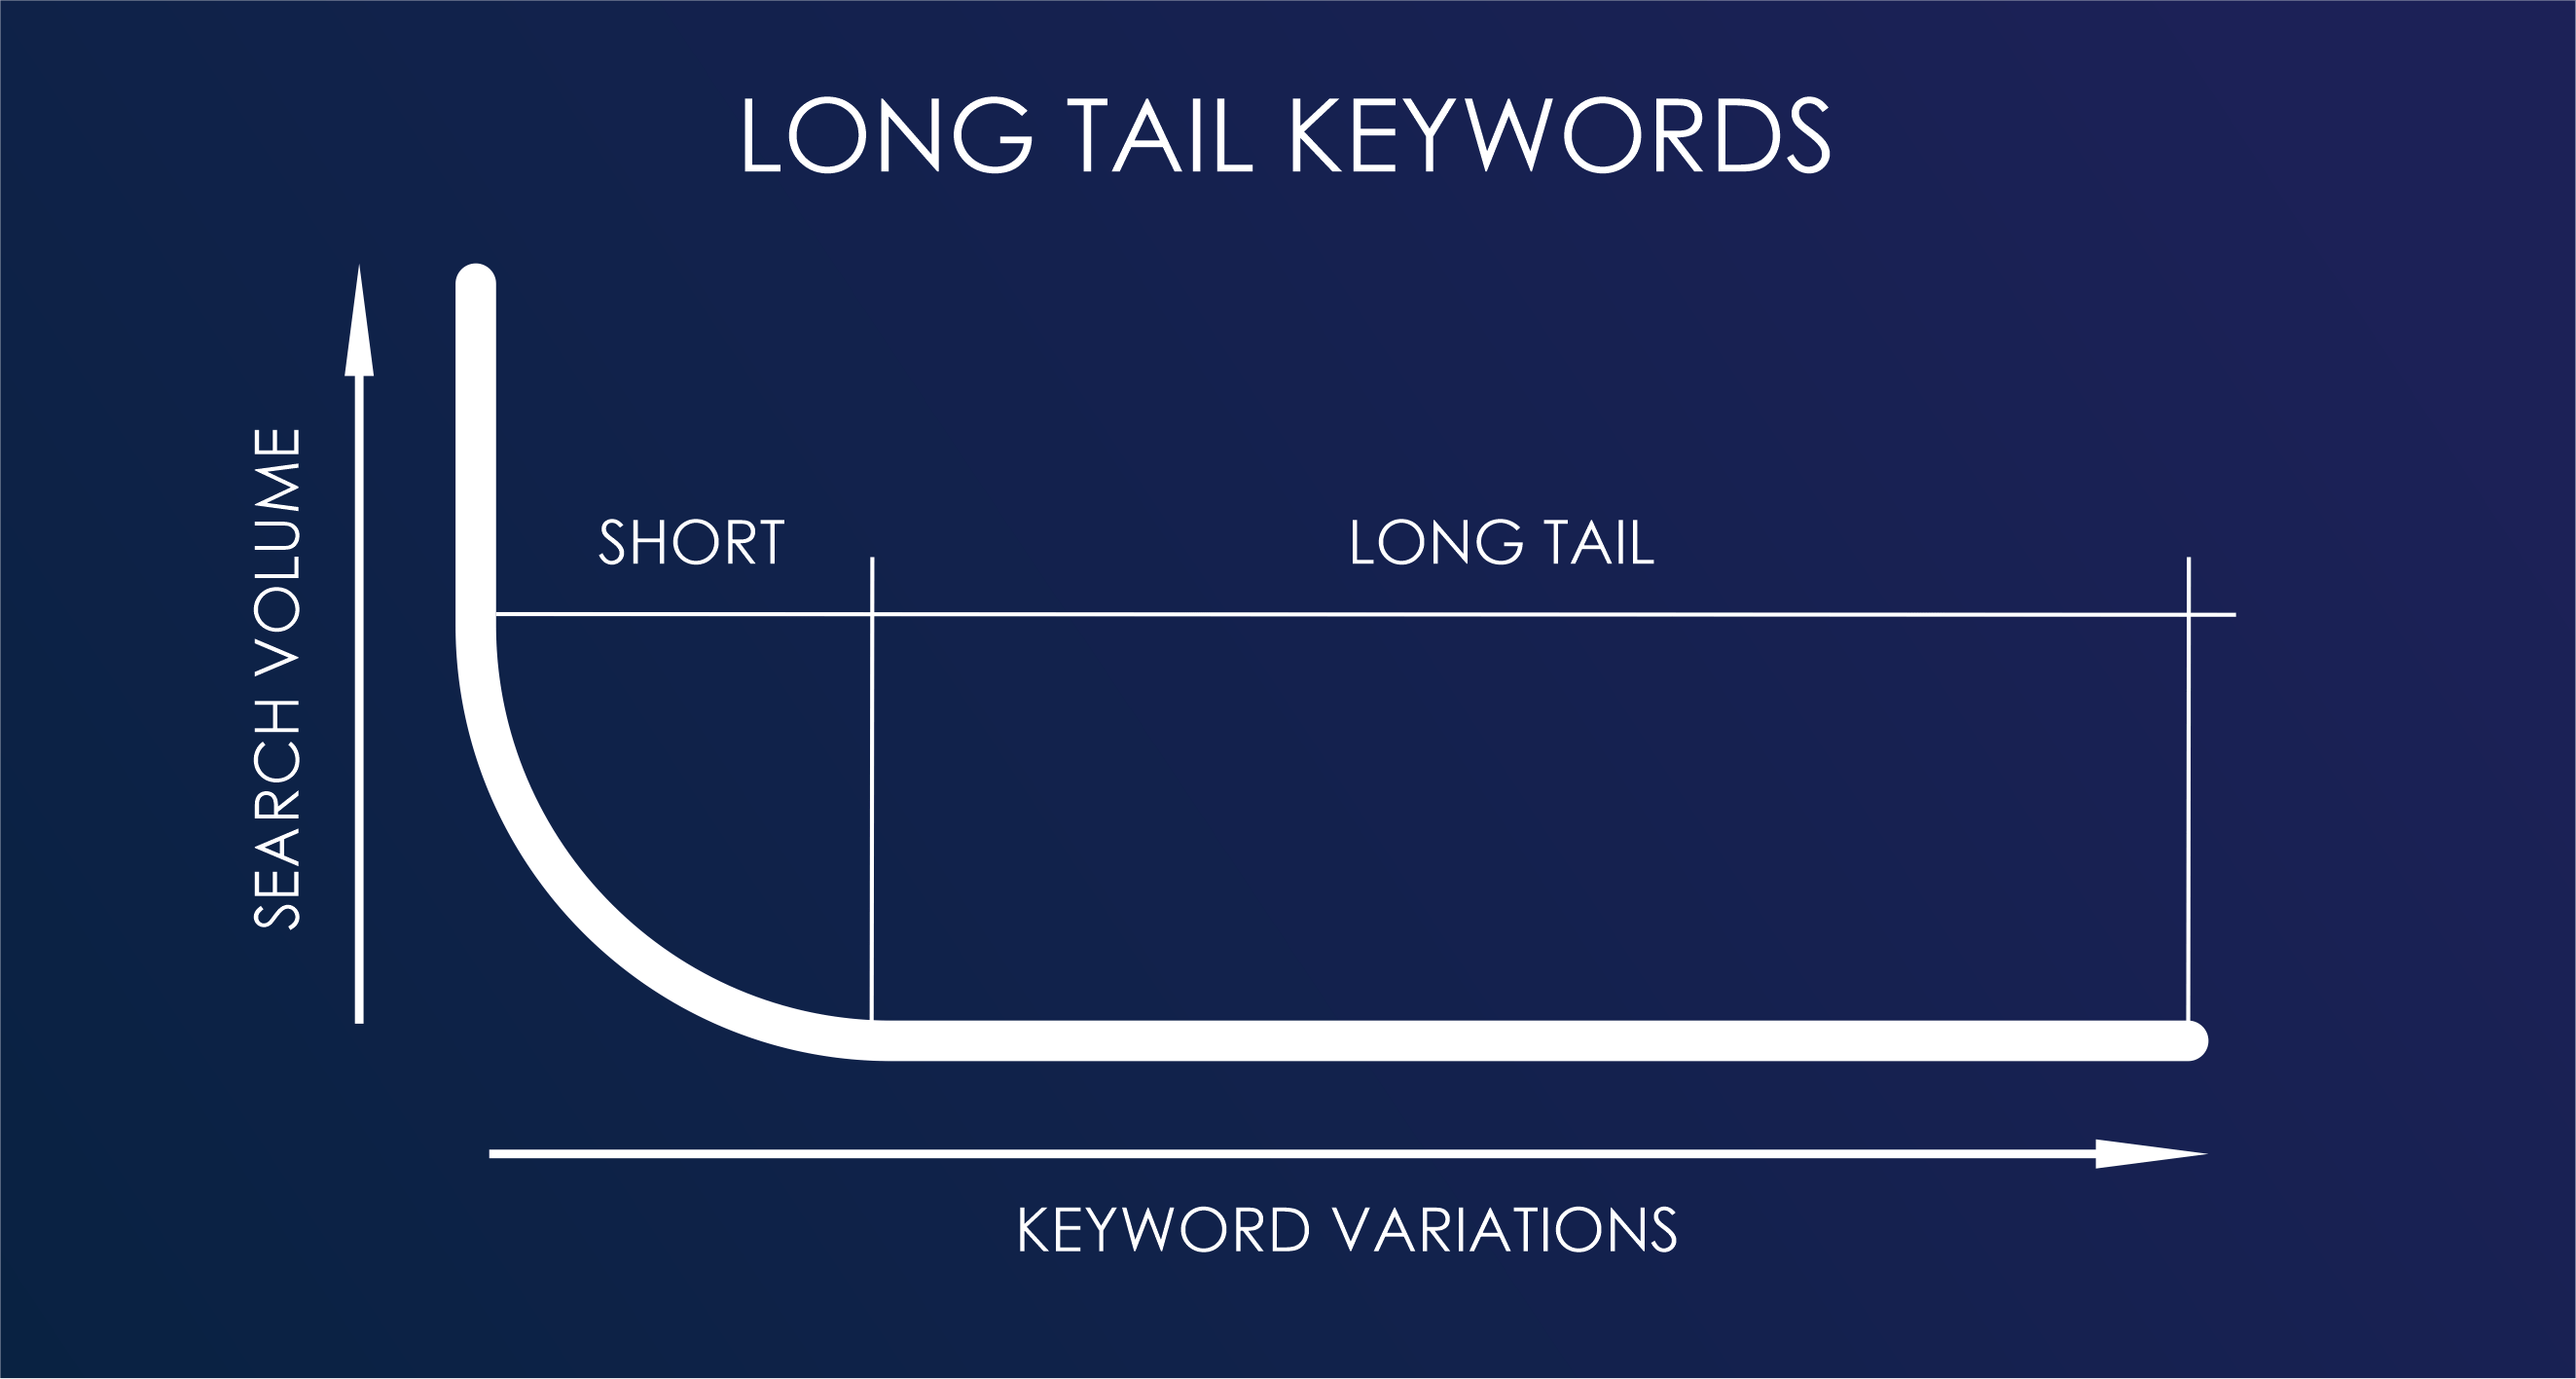 The Ultimate Guide to Keyword Research - How to Find the Right Keywords